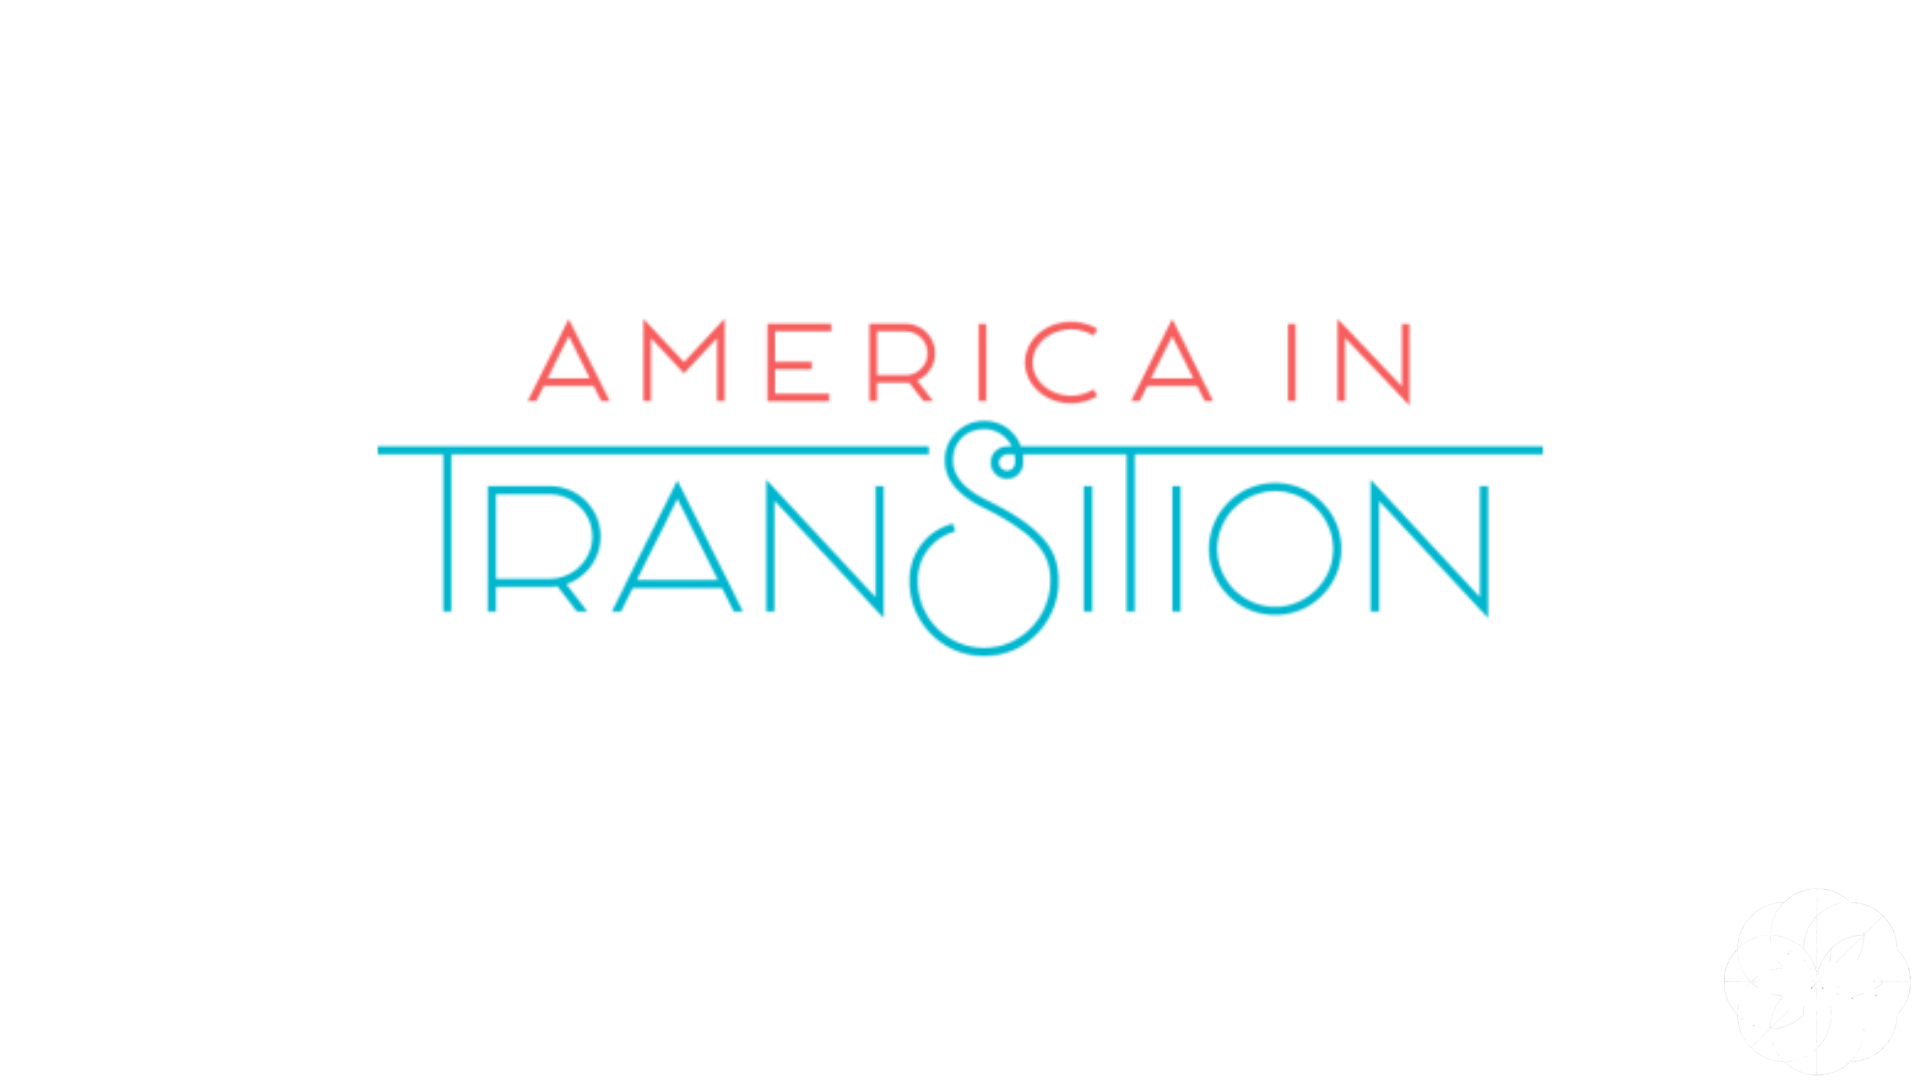 The logo for America in Transition featuring red and teal scripted font